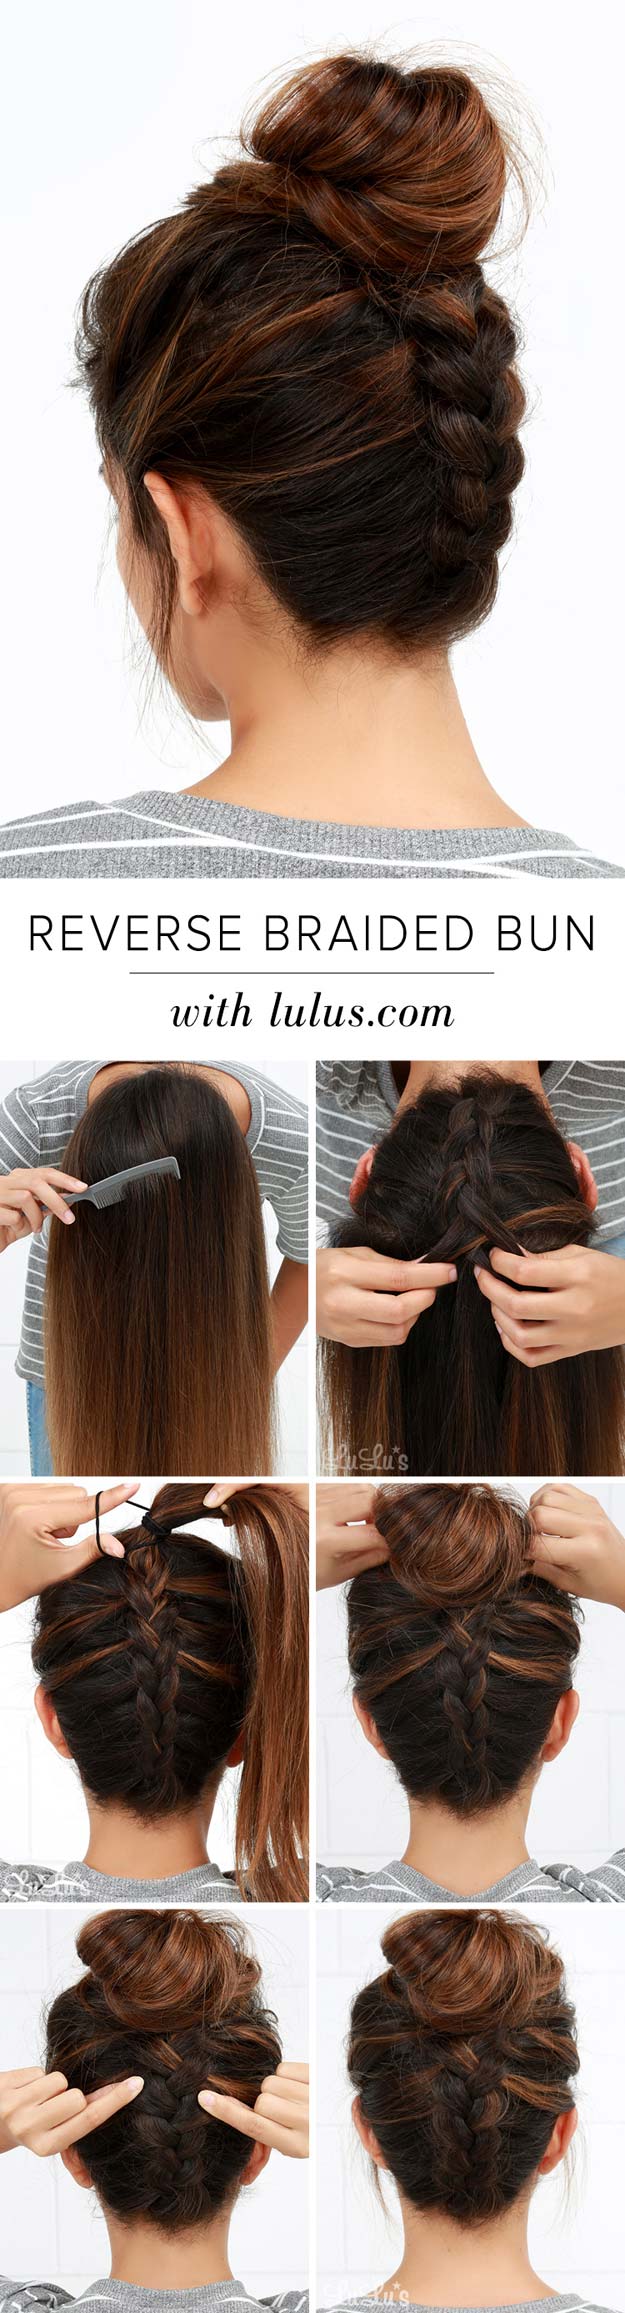 Cool and Easy DIY Hairstyles - Reversed Braided Bun - Quick and Easy Ideas for Back to School Styles for Medium, Short and Long Hair - Fun Tips and Best Step by Step Tutorials for Teens, Prom, Weddings, Special Occasions and Work. Up dos, Braids, Top Knots and Buns, Super Summer Looks http://diyprojectsforteens.com/diy-cool-easy-hairstyles